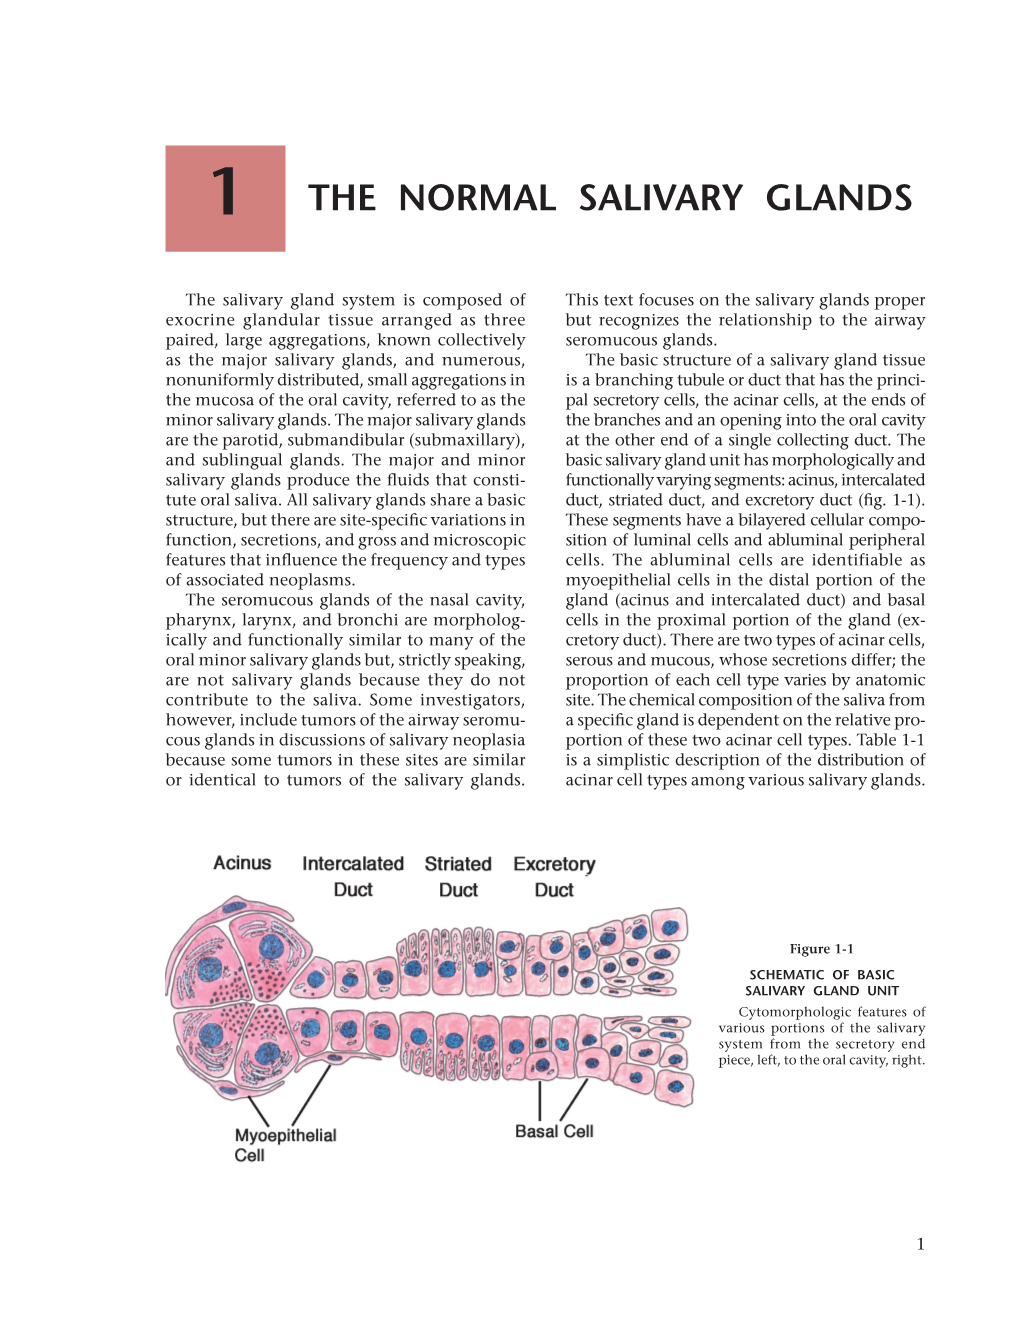 The Normal Salivary Glands